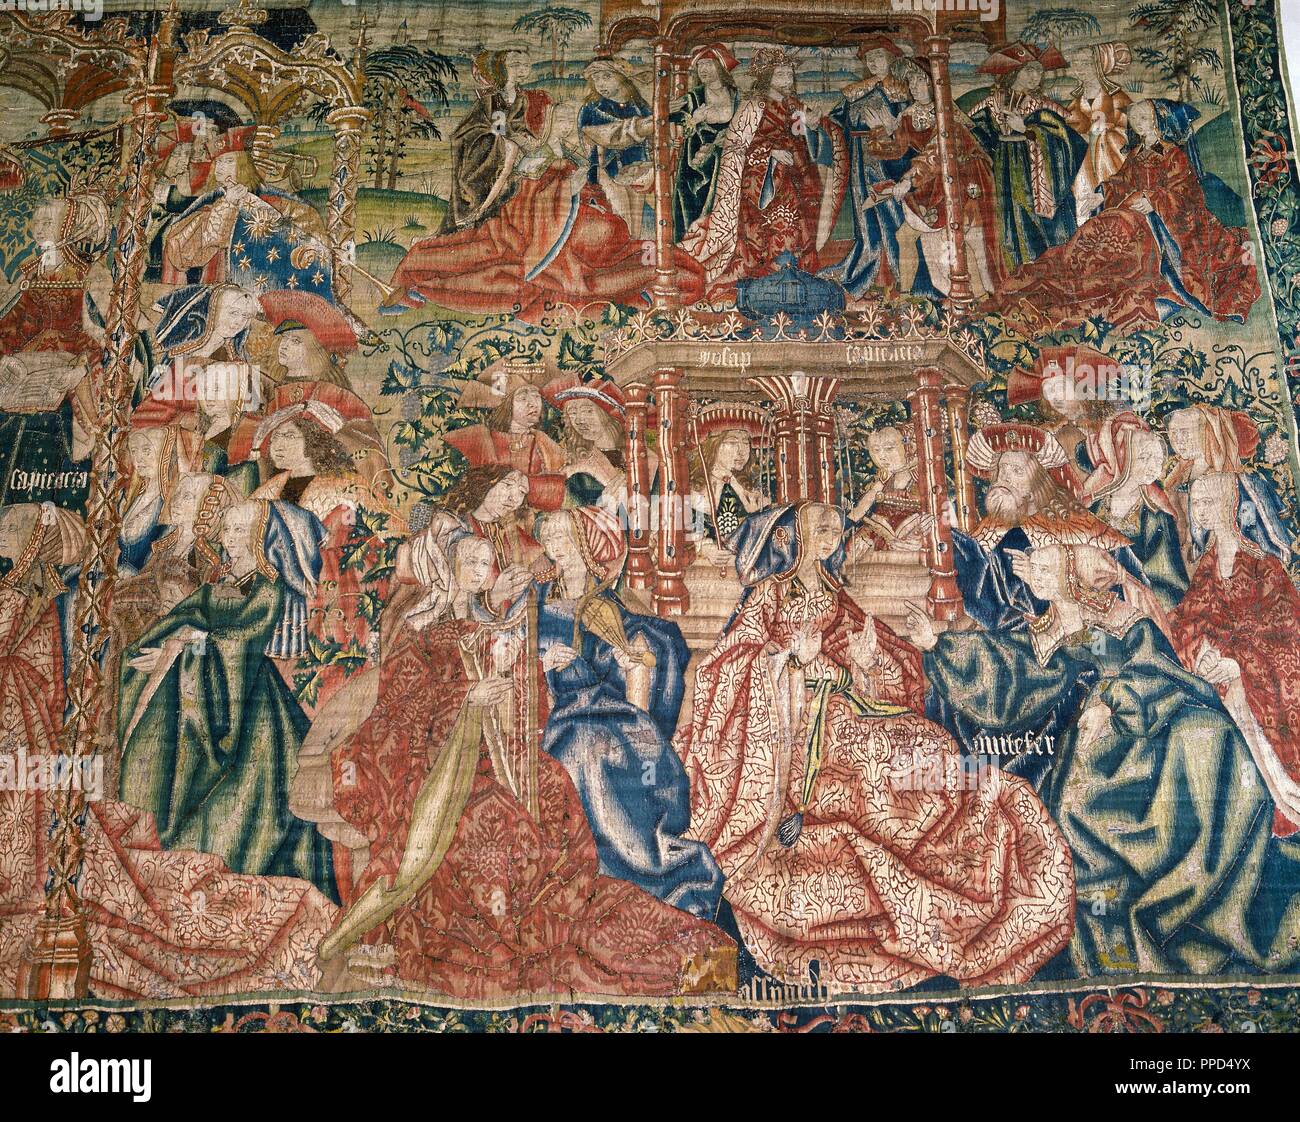 Tapestry of the Serie History of Joseph in Egypt depicting the Exaltation of Joseph (detail). Story of Genesis where Joseph is sold to the Ishmaelites by his brothers in Dotan for 20 silver coins, and his subsequent exaltation in the court of Pharaoh. Made in Brussels, early 16th century. Donated by the archbishop Fernando de Aragon. Major Sacristy of the Cathedral of Tarragona. Catalonia. Spain. Stock Photo